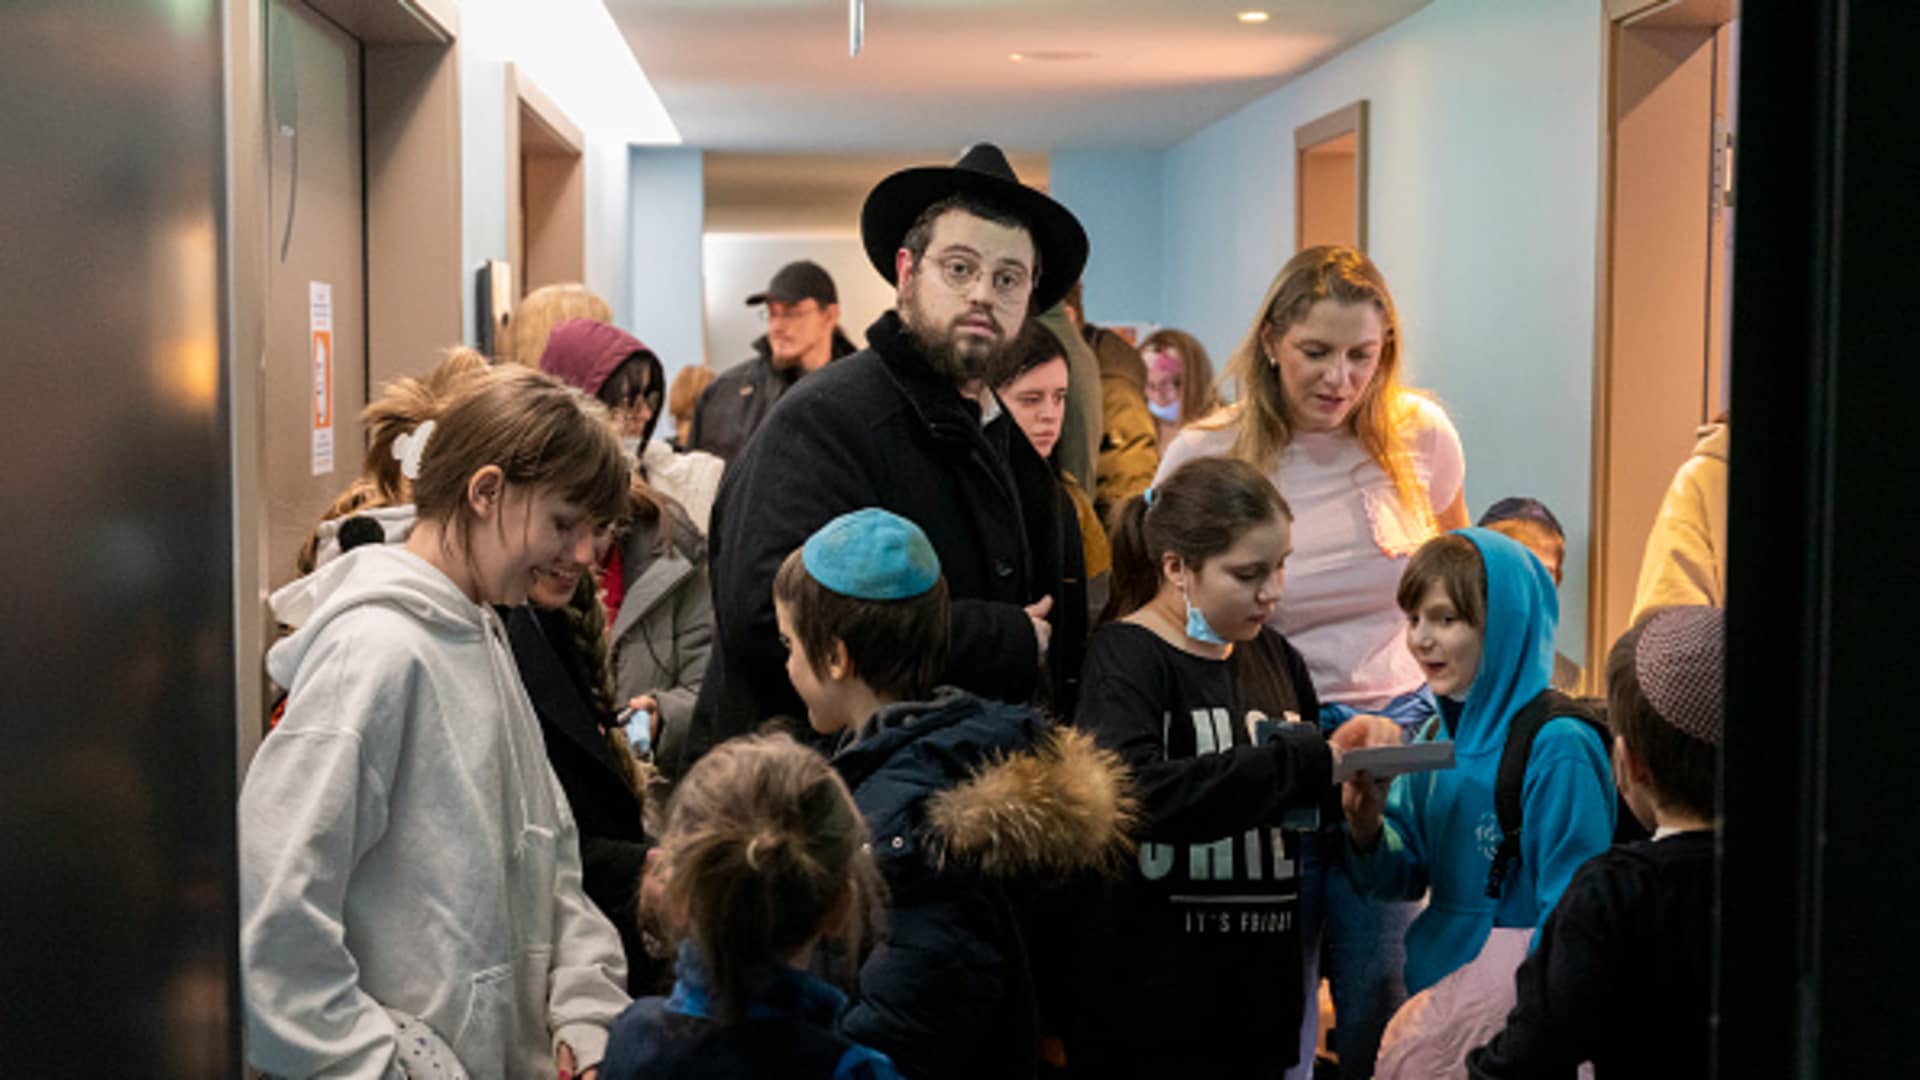 Mendi Wolff, son of the Chief Rabbi of Odessa and Southern Ukraine, stands in a hallway in a hotel among children from an orphanage in Odessa, Ukraine. Two buses with children from an orphanage in Odessa have arrived in Berlin.